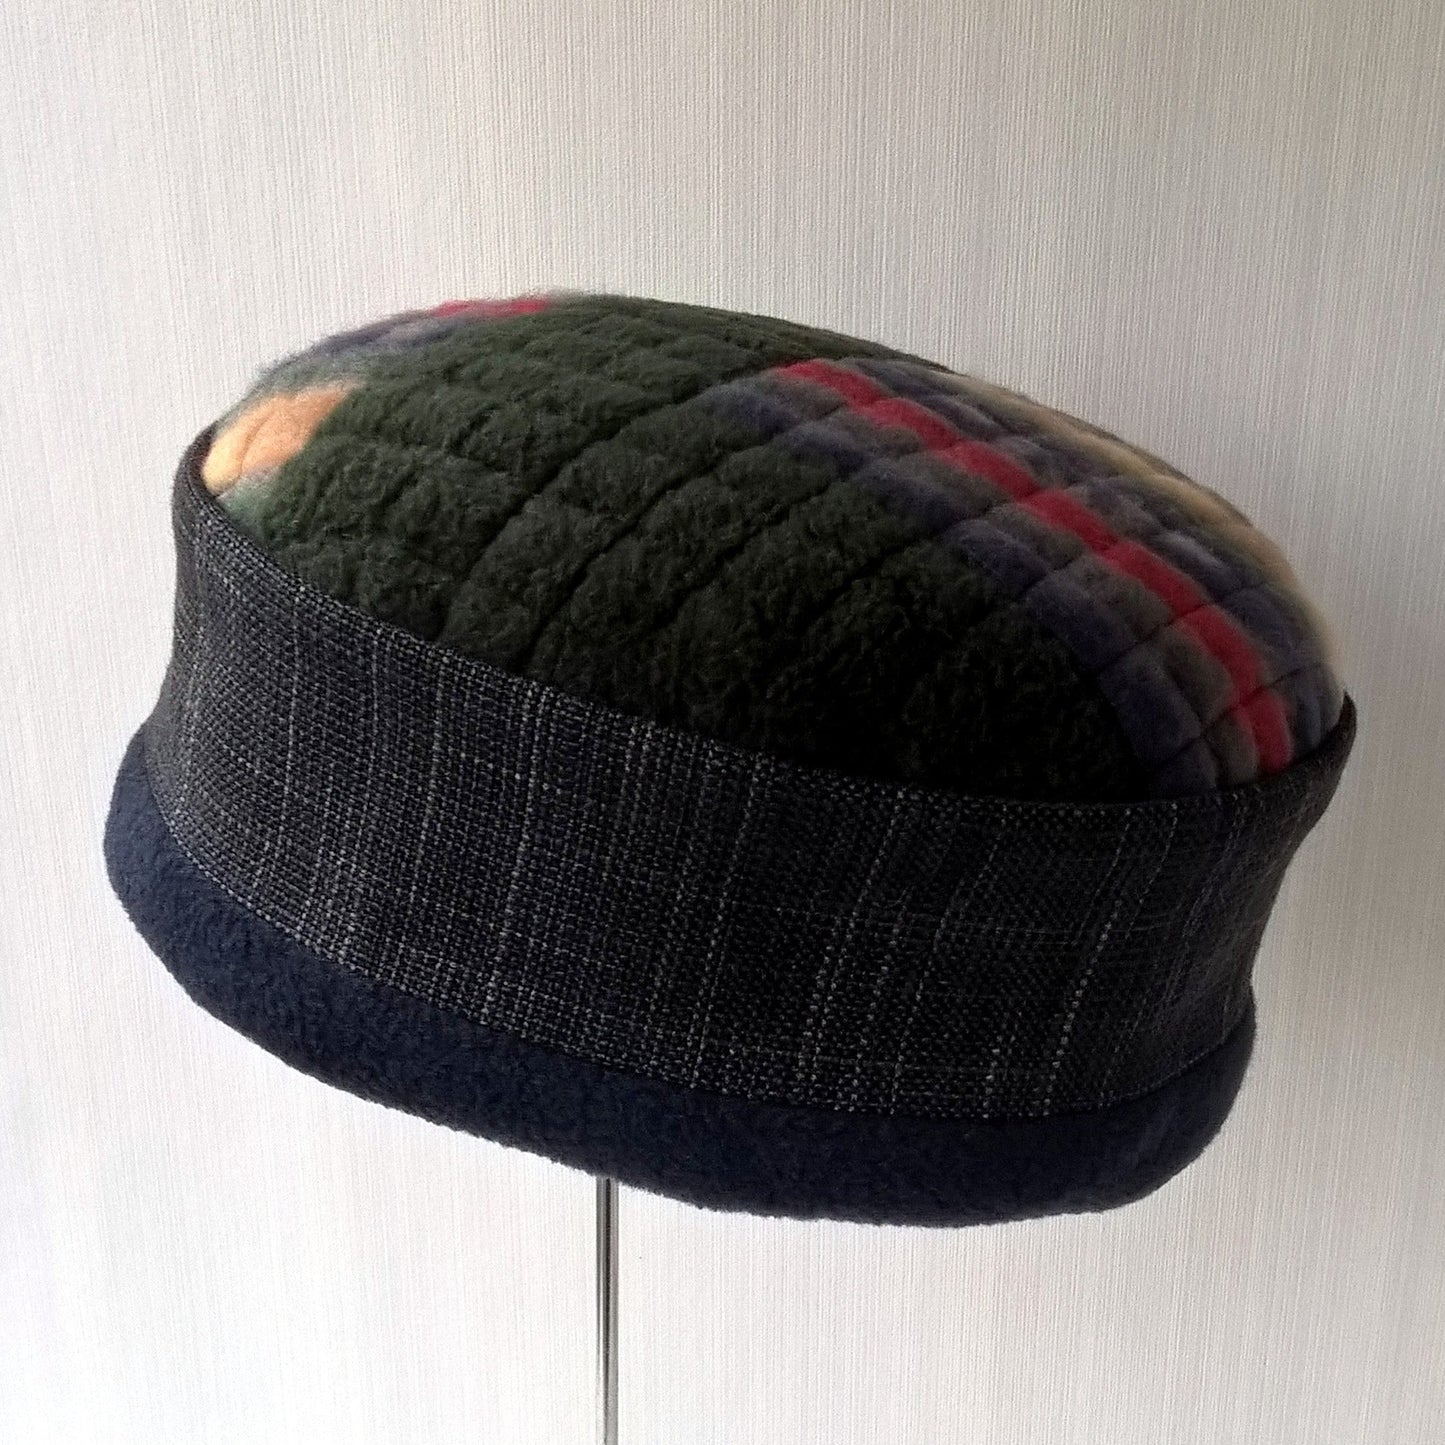 Pillbox shaped hat with multi coloured fleece tip and fleece lining